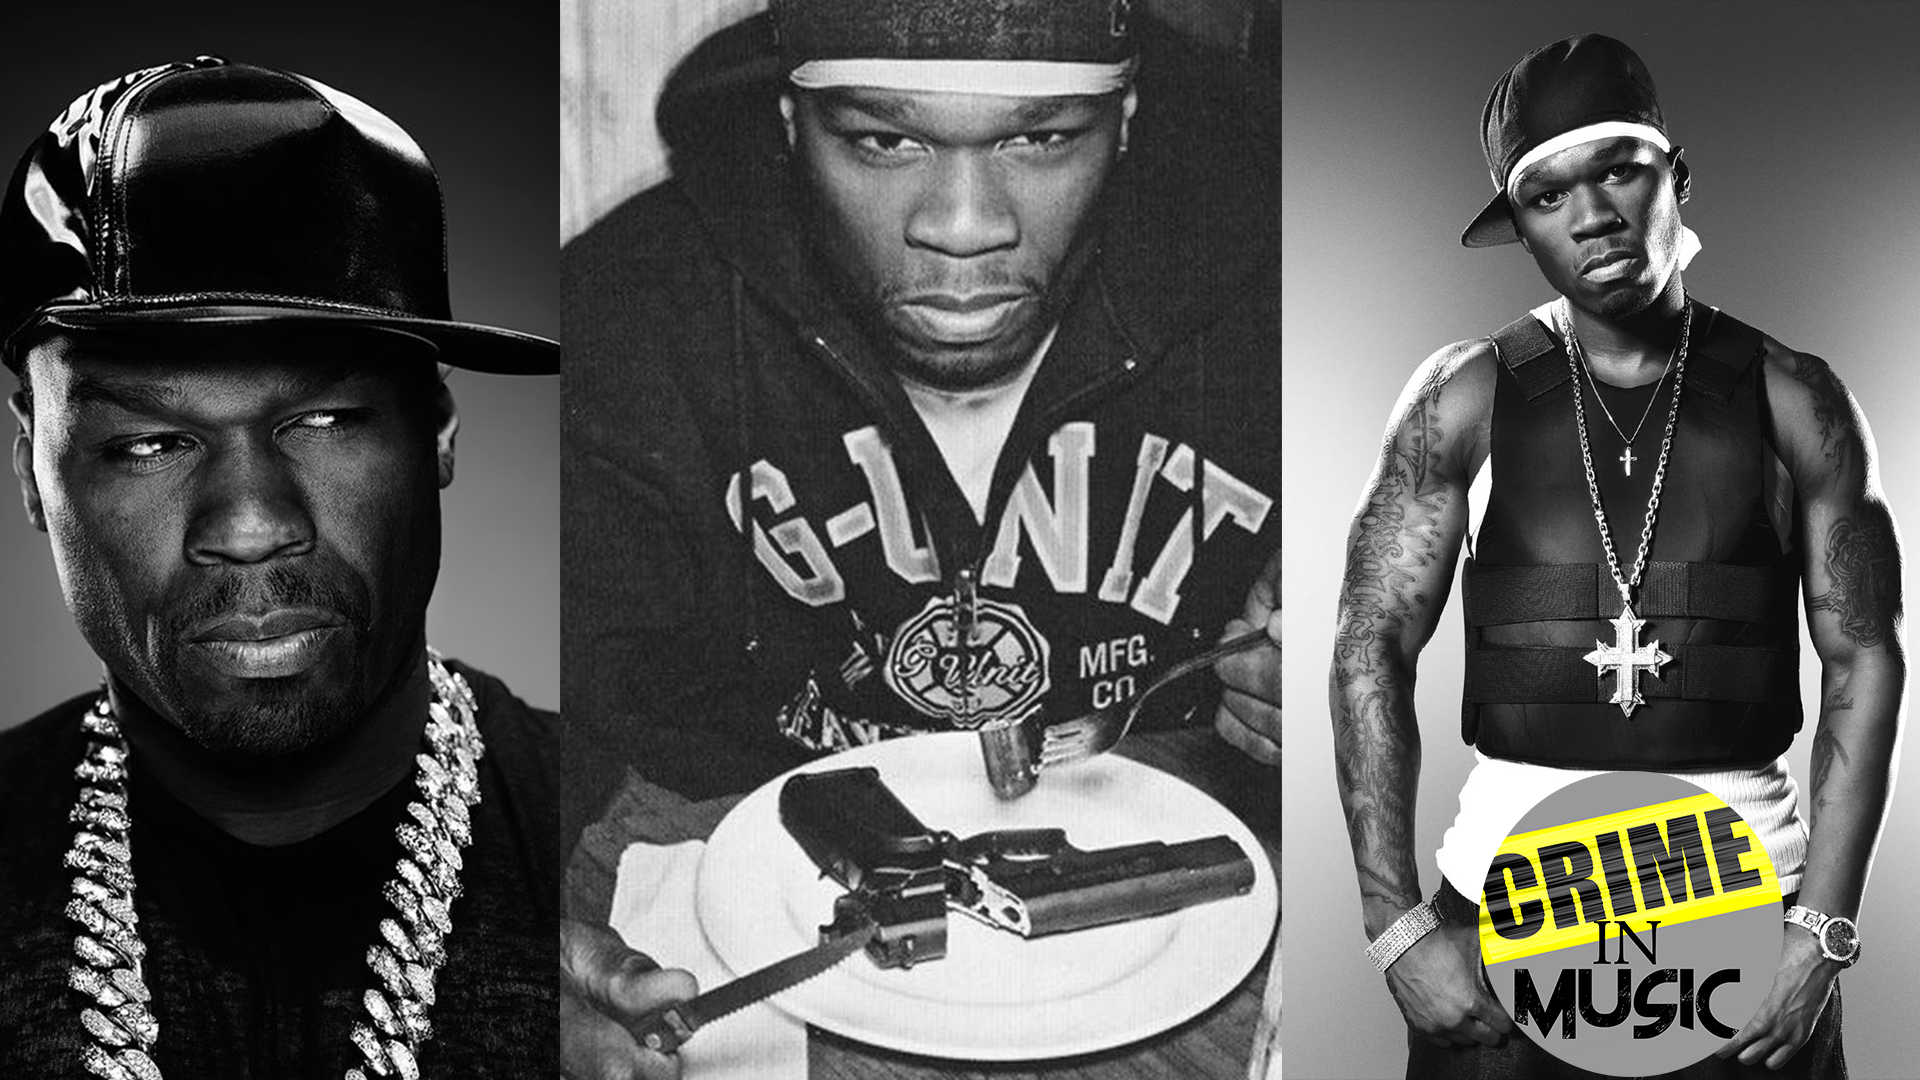 photo collage of 50 Cent, Musician, rapper, serial entrepreneur, actor, producer